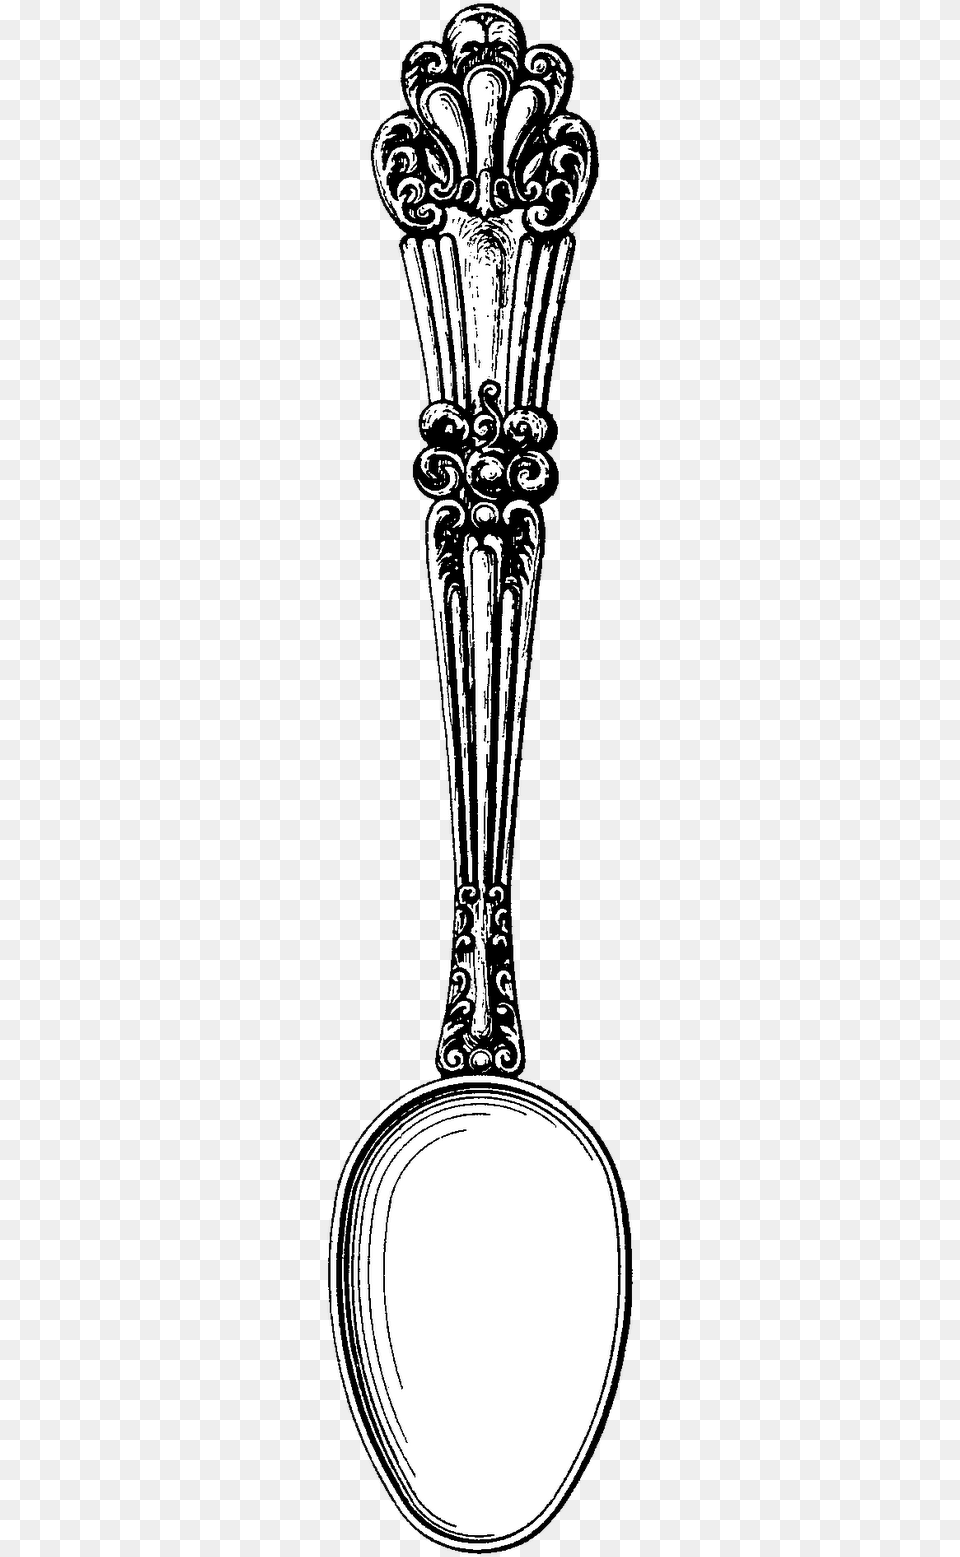 Drawn Spoon Antique Spoon Antique Spoon Drawing, Cutlery Png Image